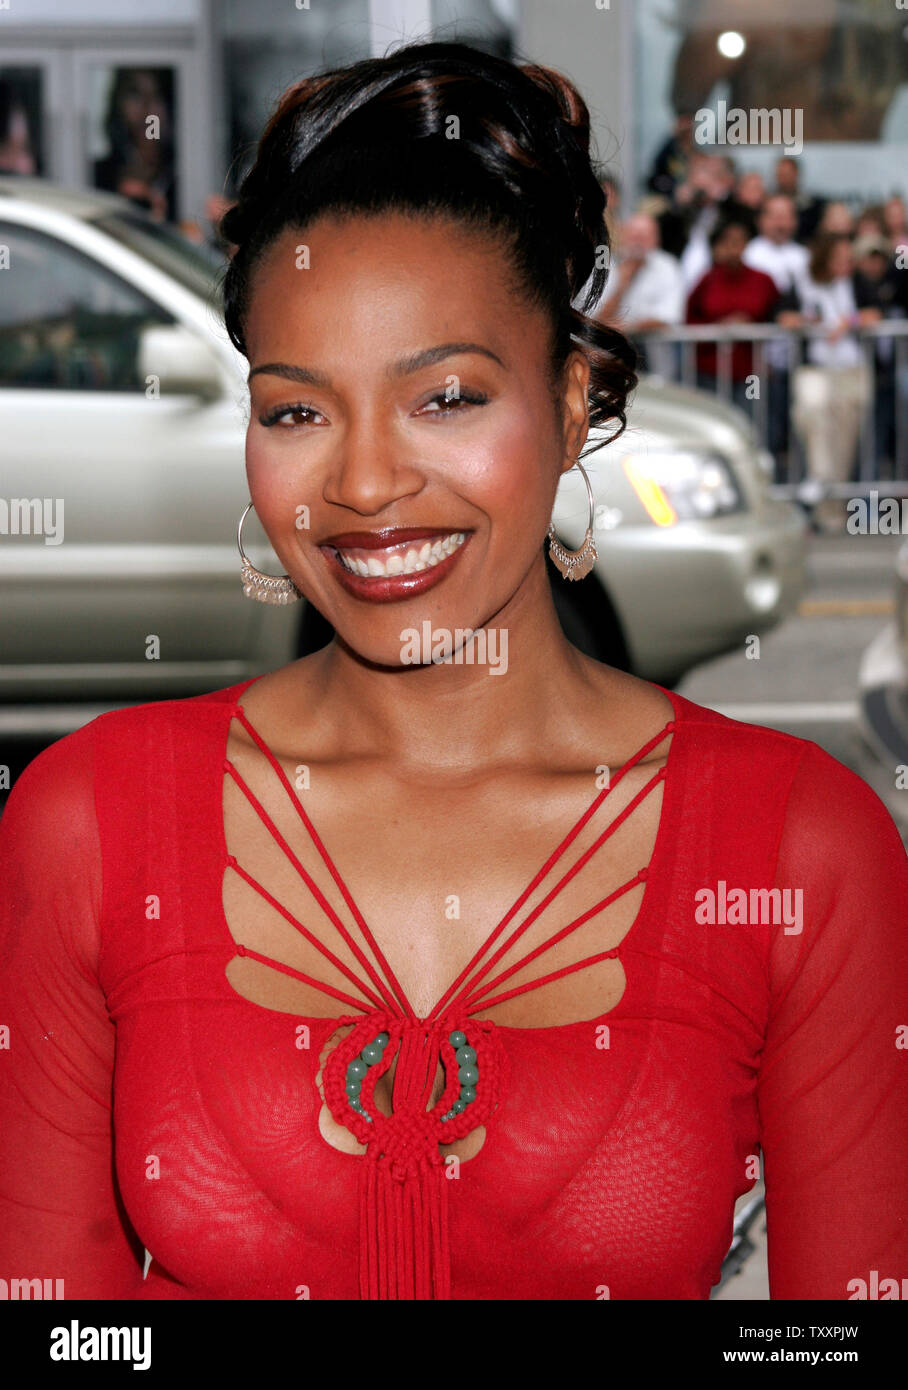 Actress and cast member Nona Gaye poses for photographers at the November 7, 2004 Los Angeles  premiere of the new animated film 'Polar Express'. The film, starring Tom Hanks, is  based on the children's book of the same name and directed by Robert Zemeckis, opens in the United States November 10. (UPI Photo/Francis Specker) Stock Photo